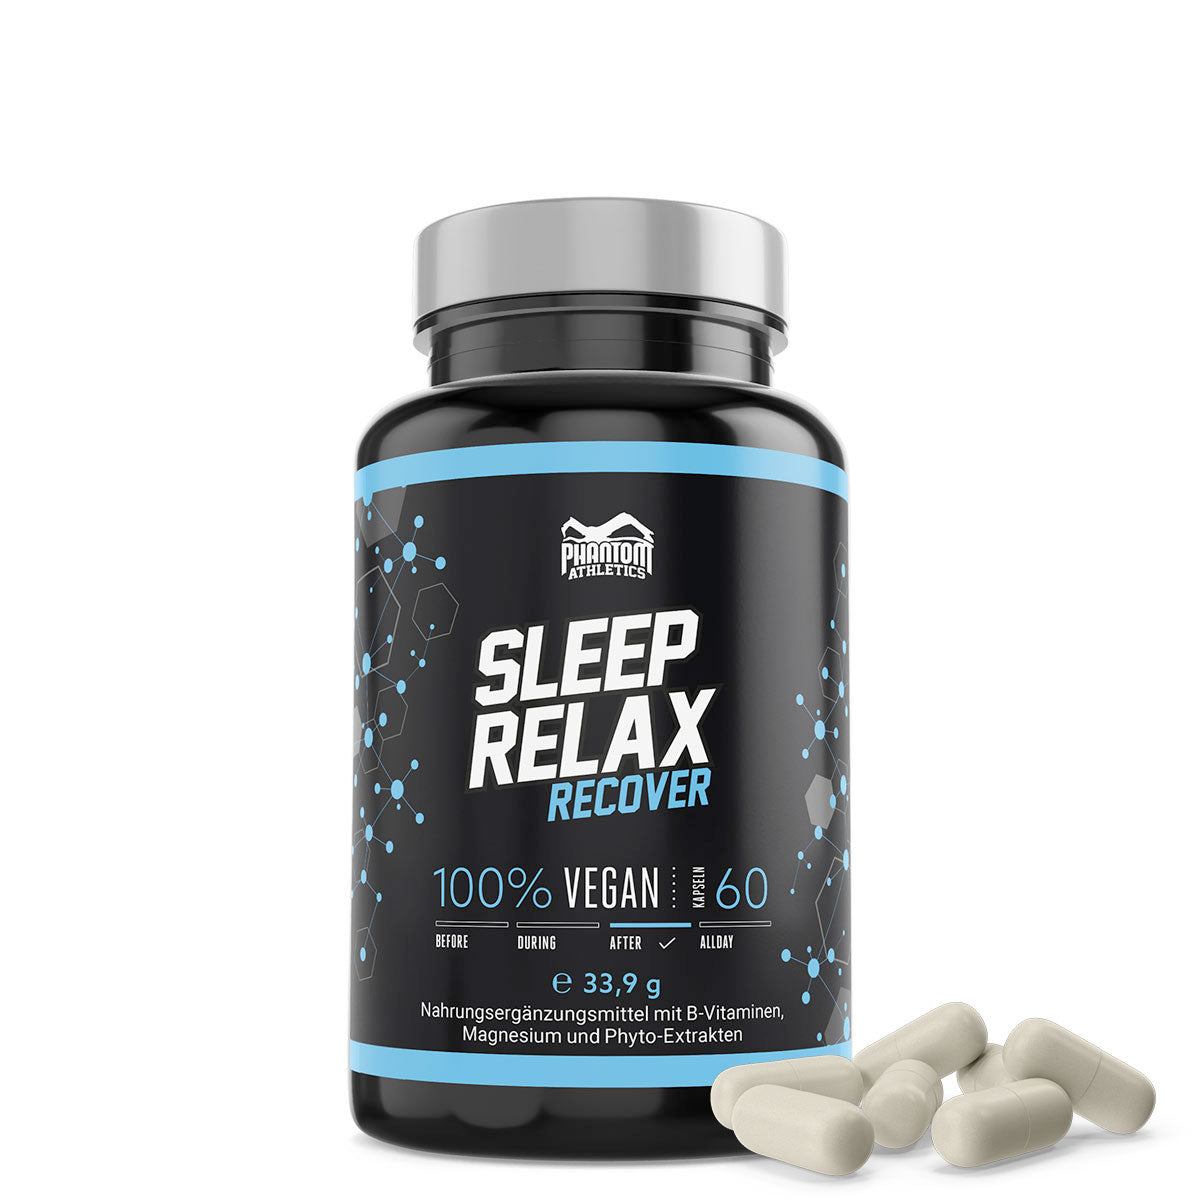 The Phantom Sleep and Relax Supplement for better regeneration in martial arts.